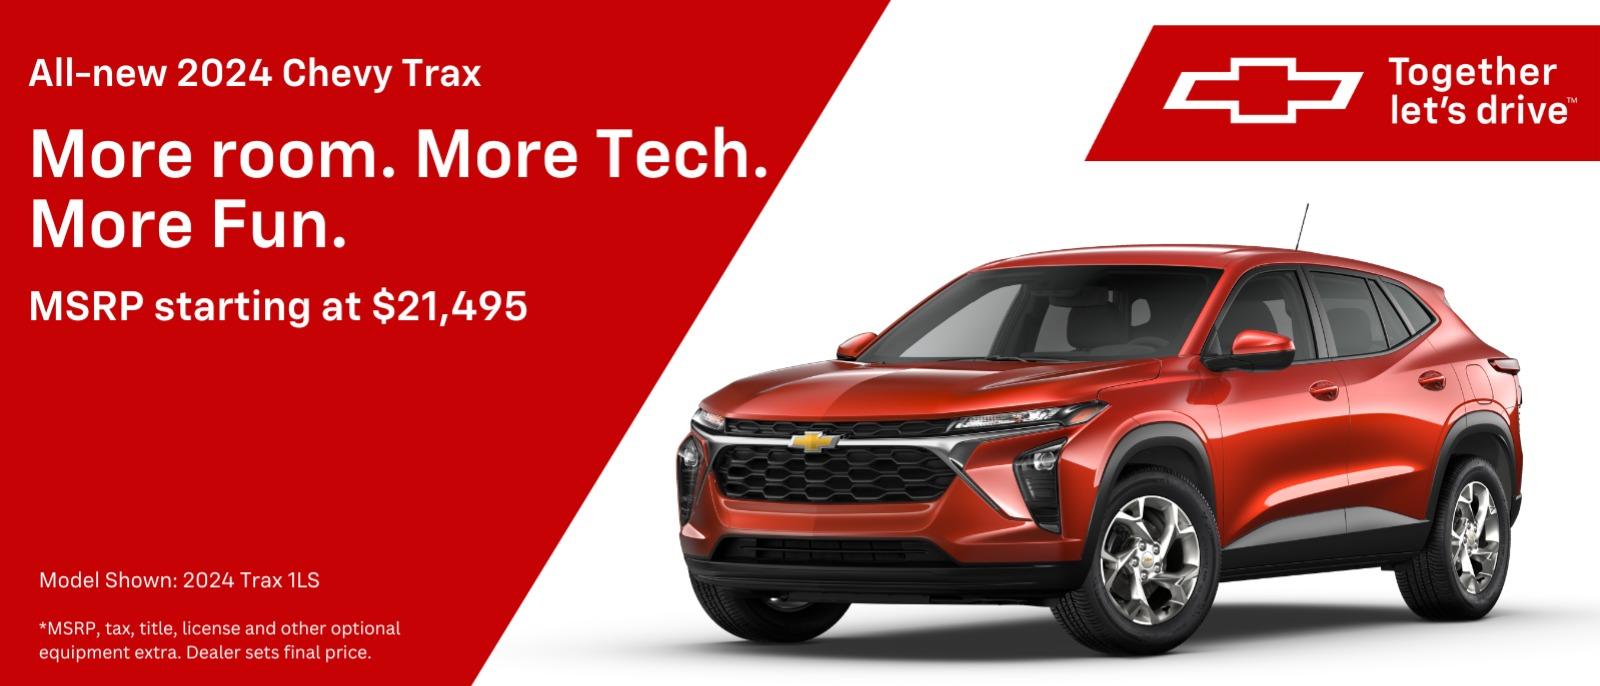 All-new 2024 Chevy Trax More room. More Tech. More Fun. MSRP starting at $21,495